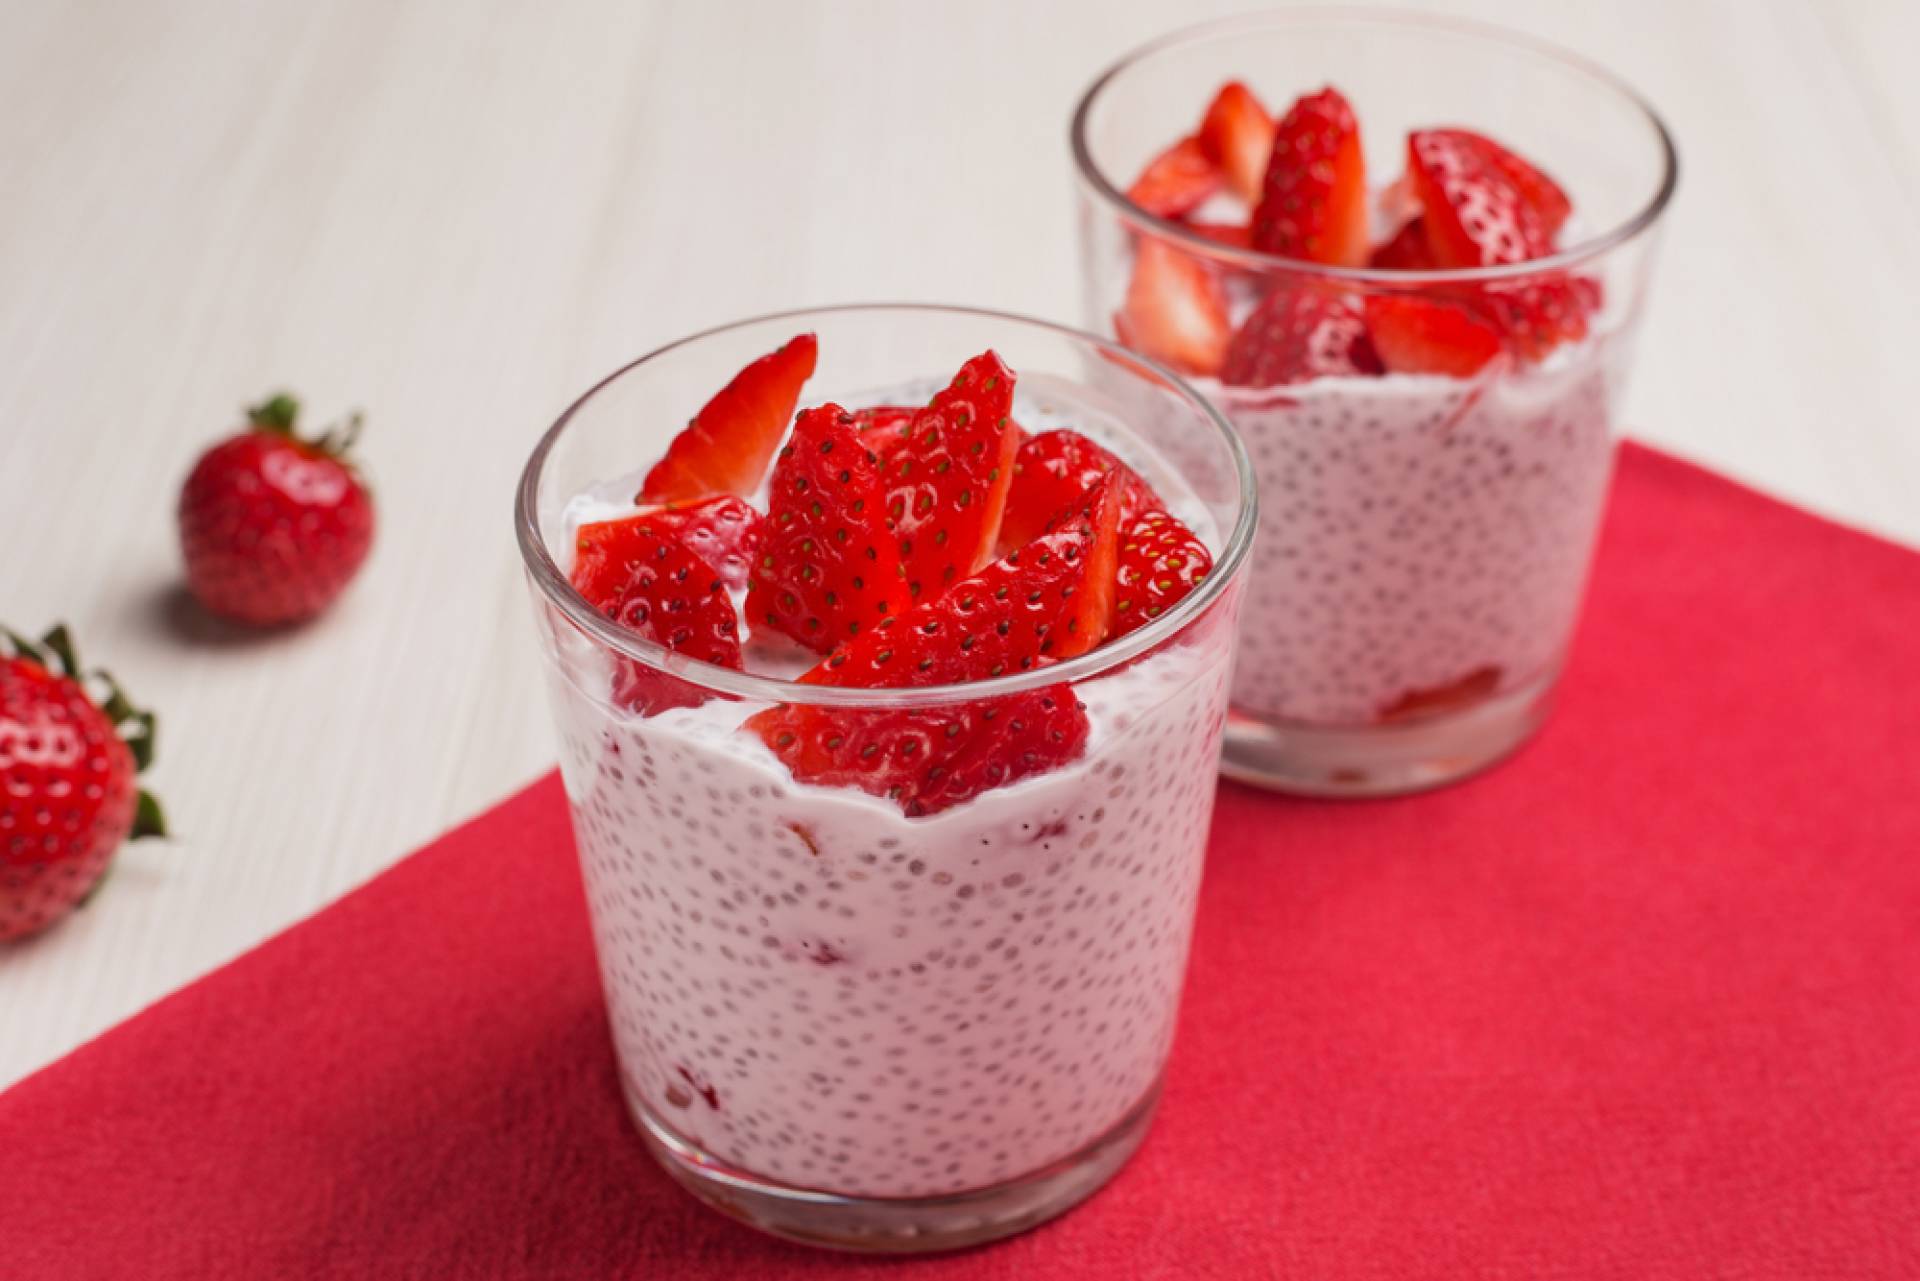 Whole30 Strawberry Chia Seed Pudding